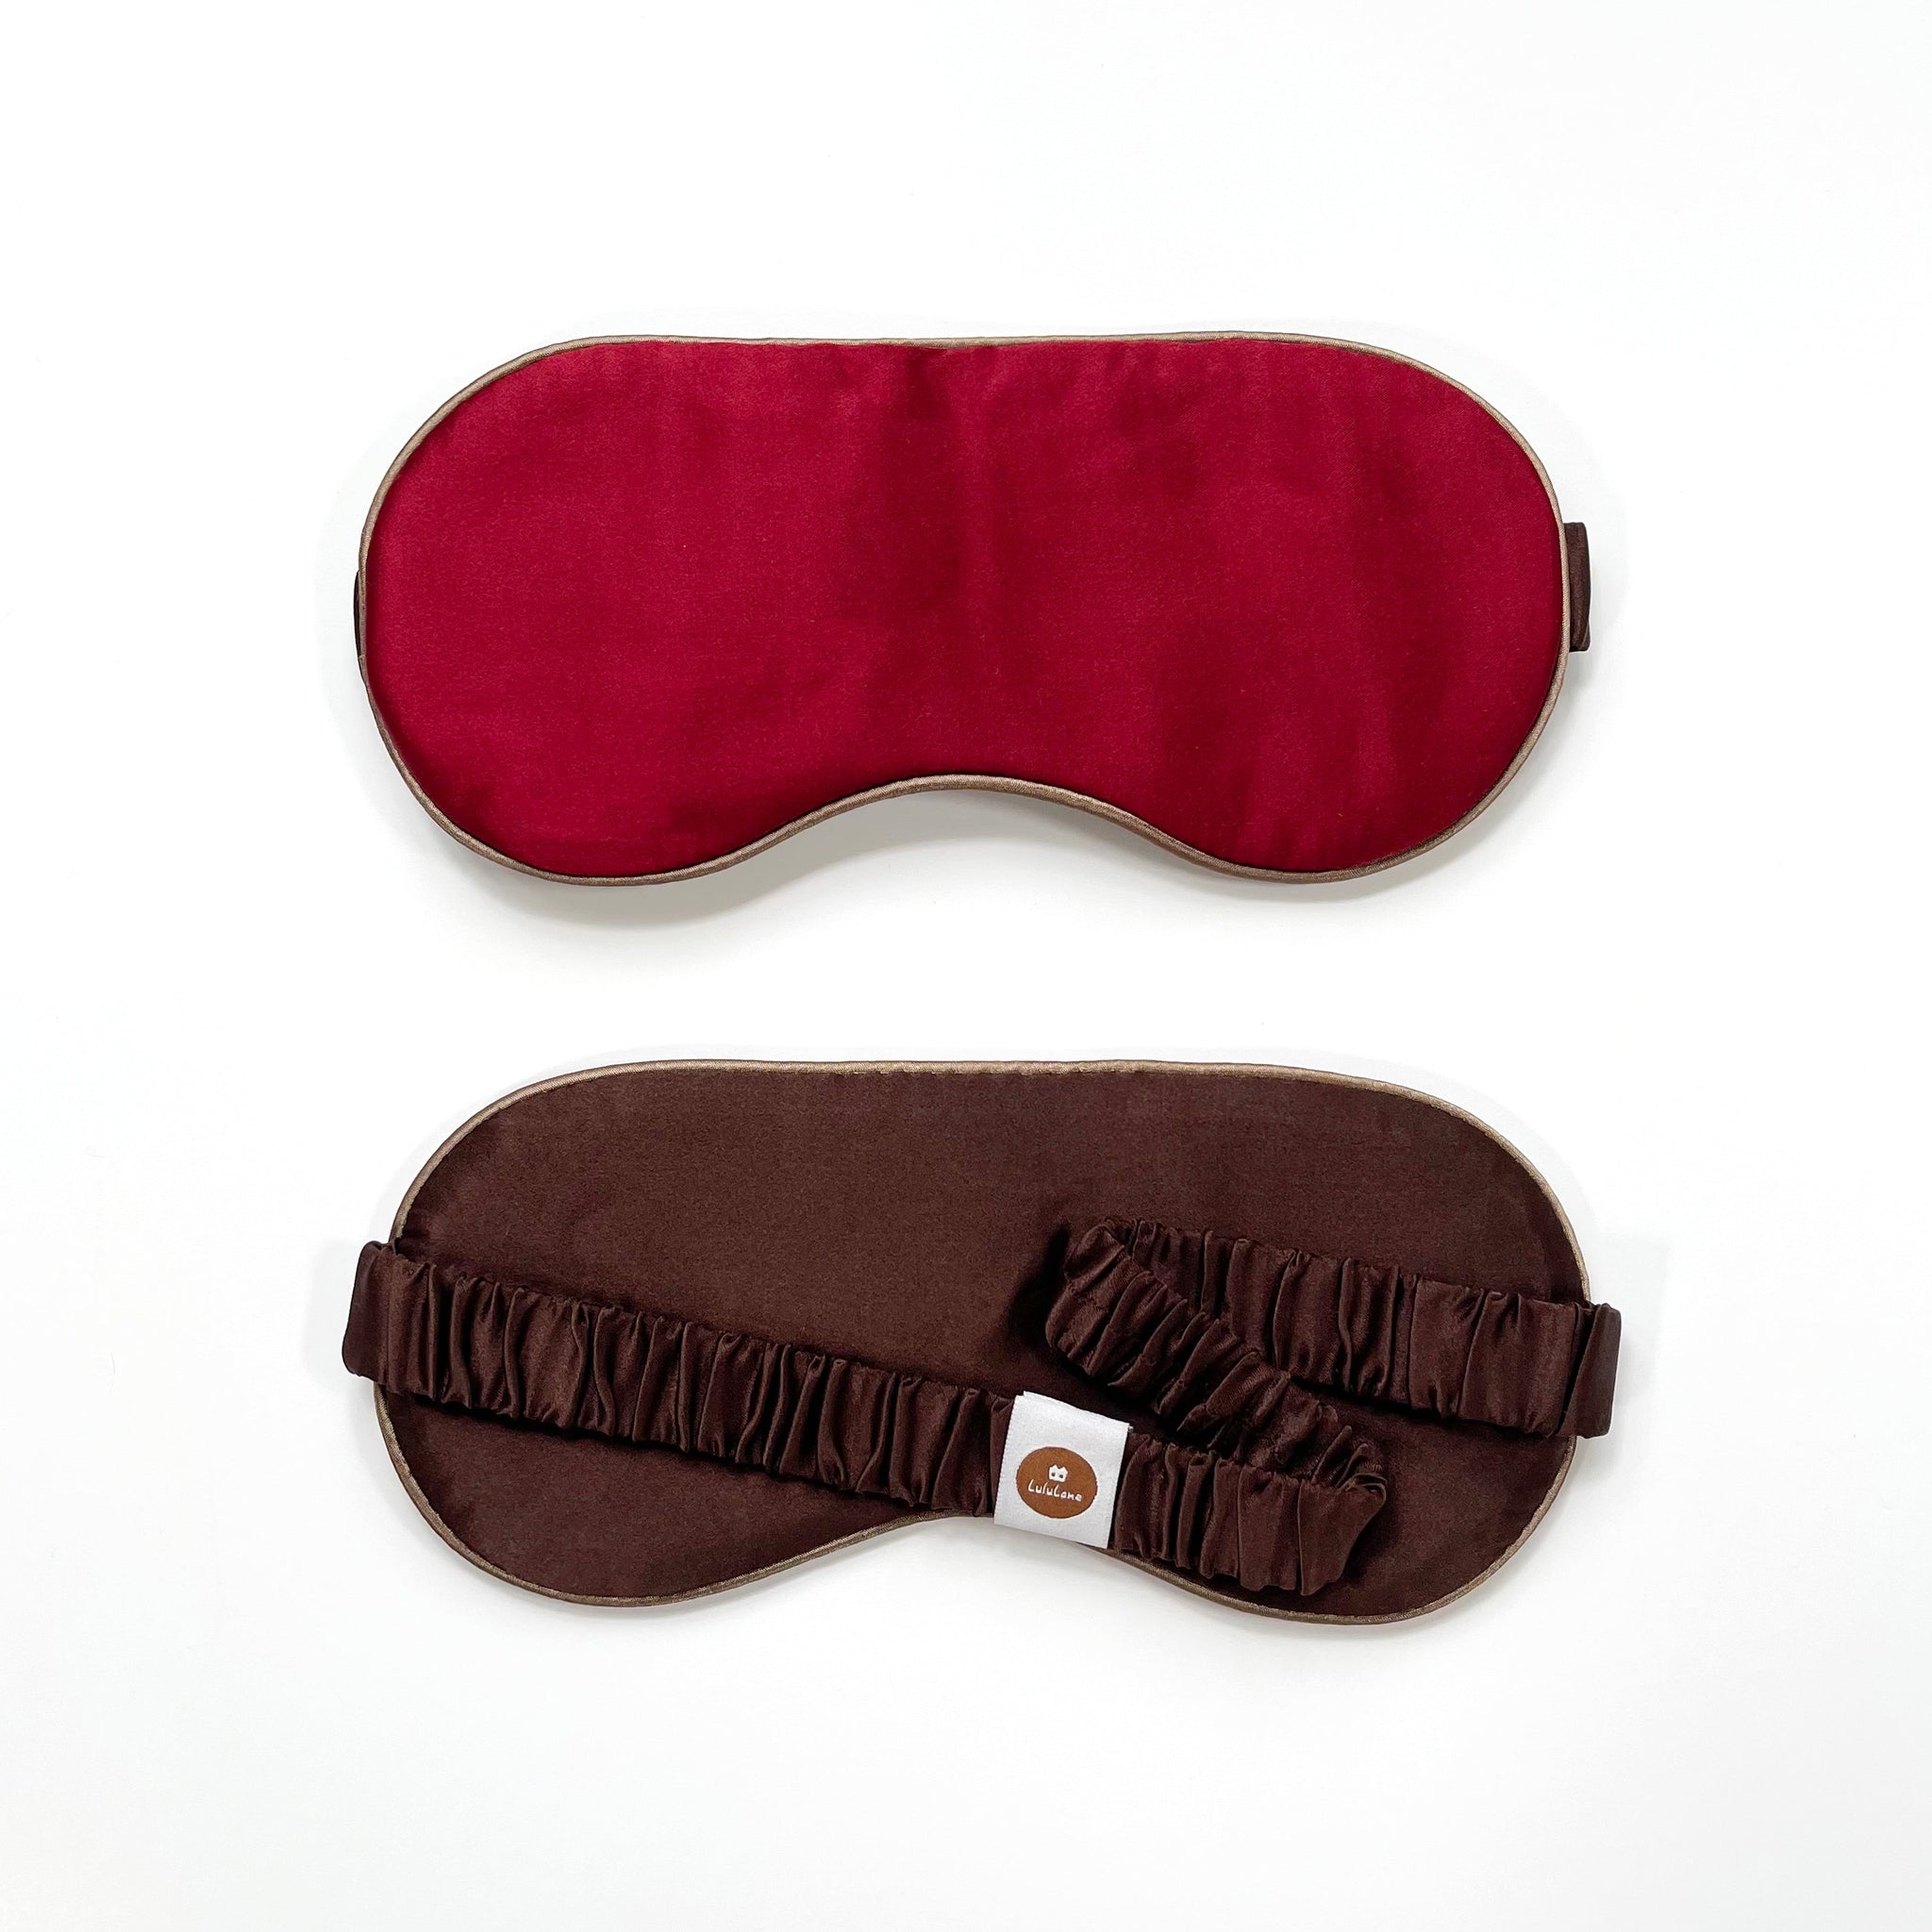 a professionally designed and handmade red silk eye mask with brown elastic strap and back side